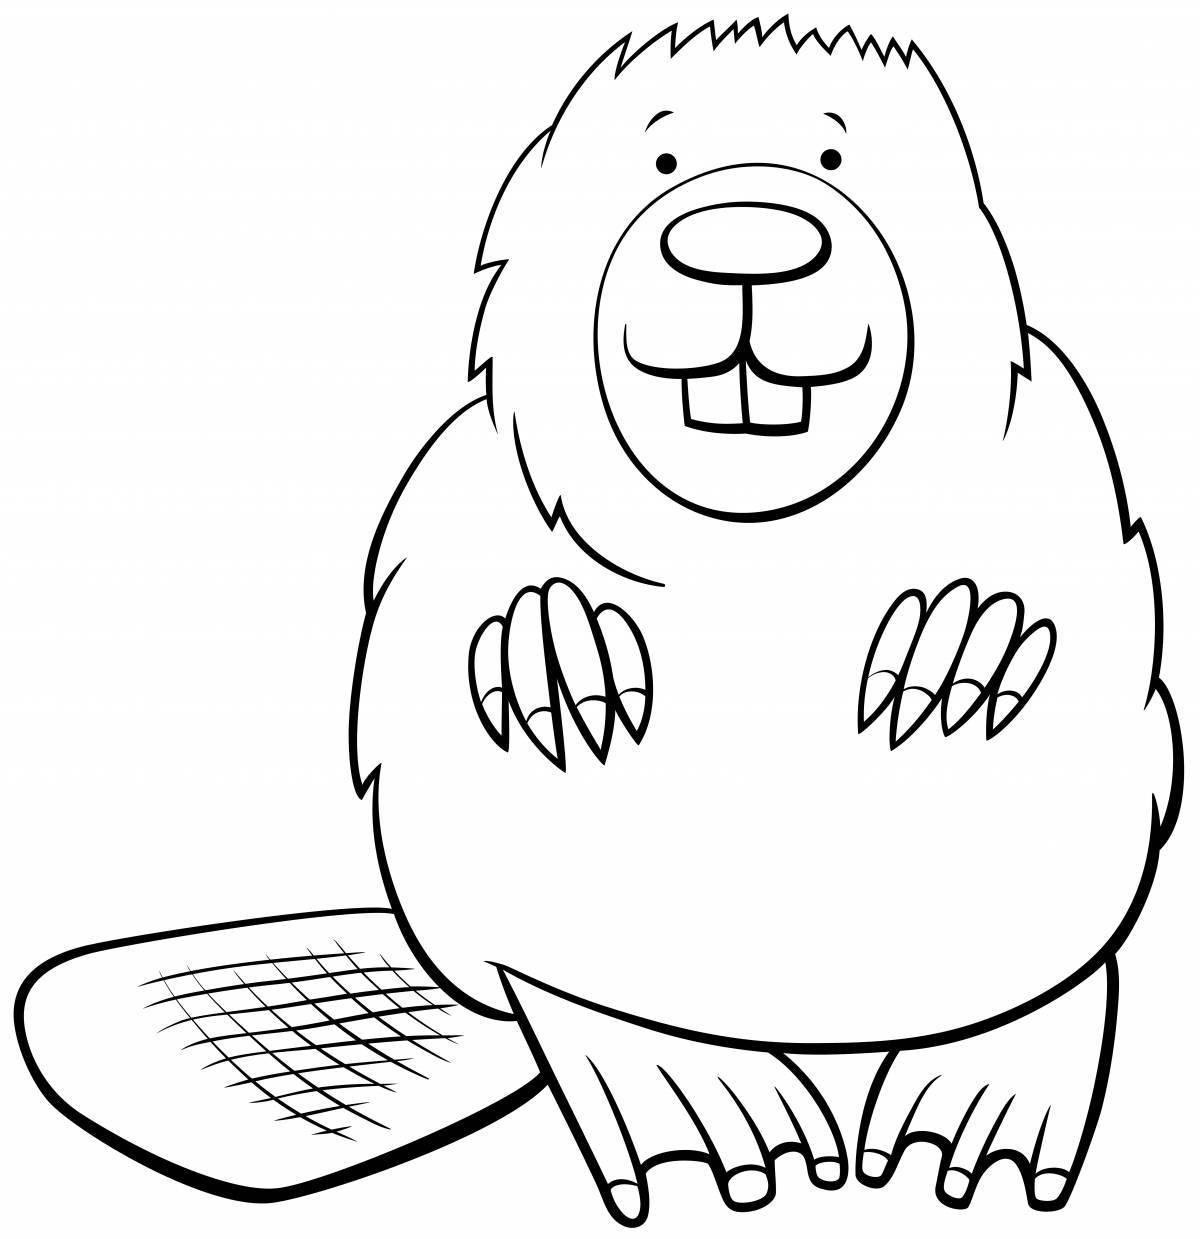 Bright beaver coloring pages